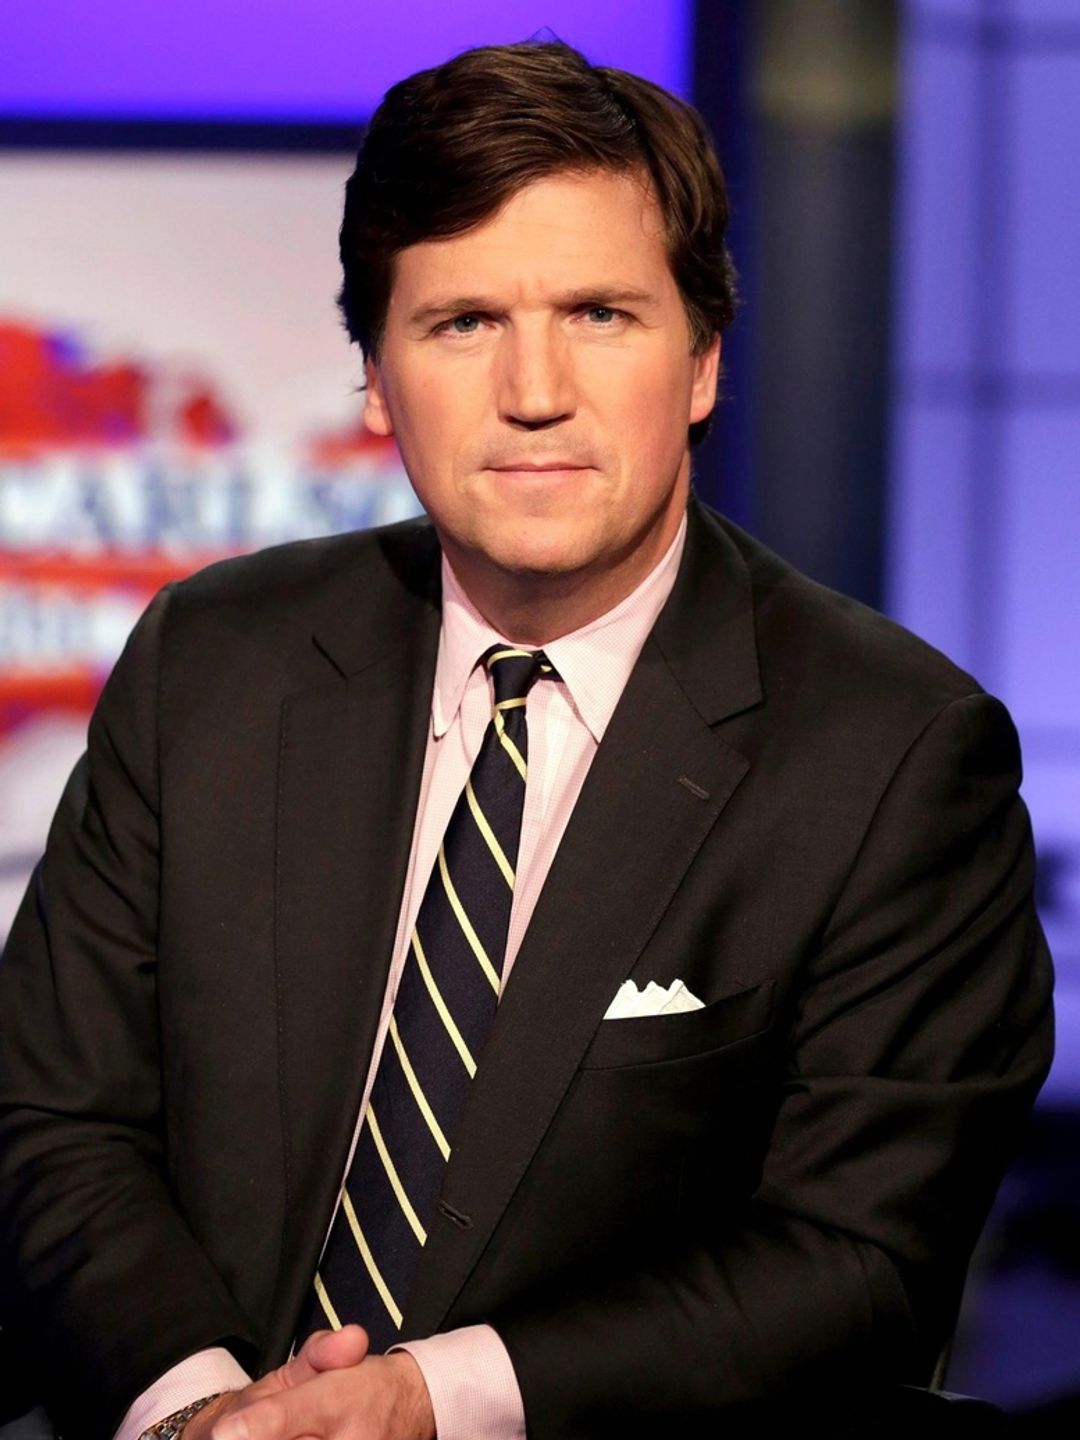 Tucker Carlson who is his father